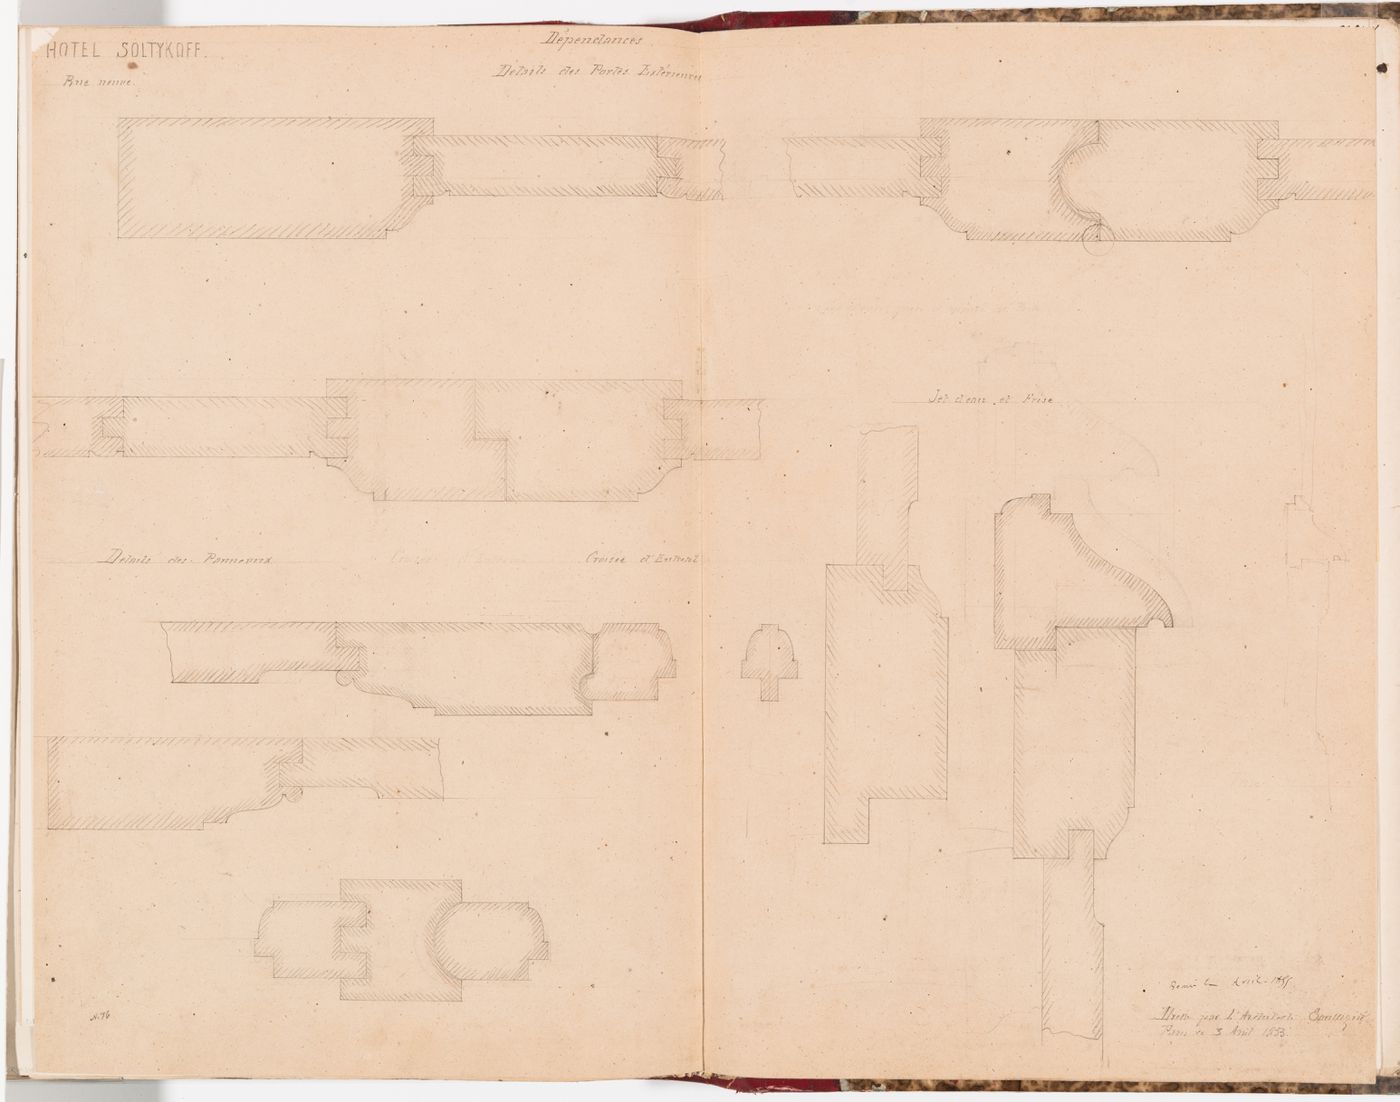 Joinery details for an exterior door, the "entresol" windows, panelling, a fountain and apparently a frieze, all for the outbuilding, Hôtel Soltykoff